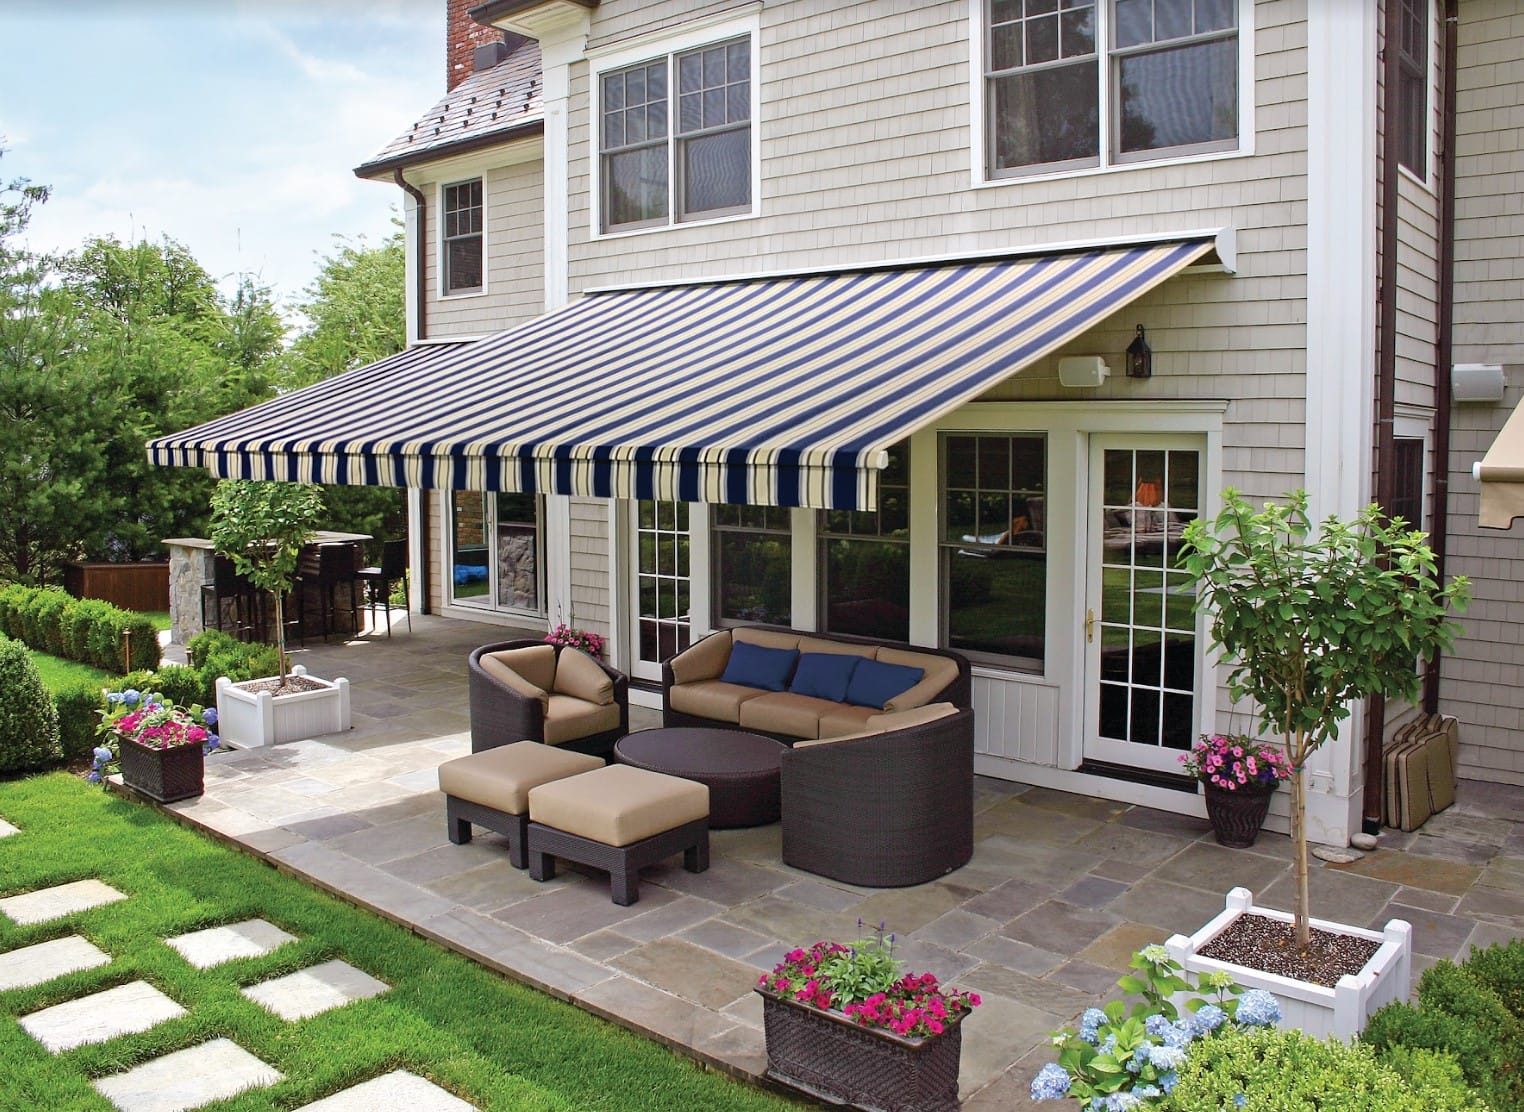 A motorized retractable awning with navy blue and cream stripes extends over a patio.